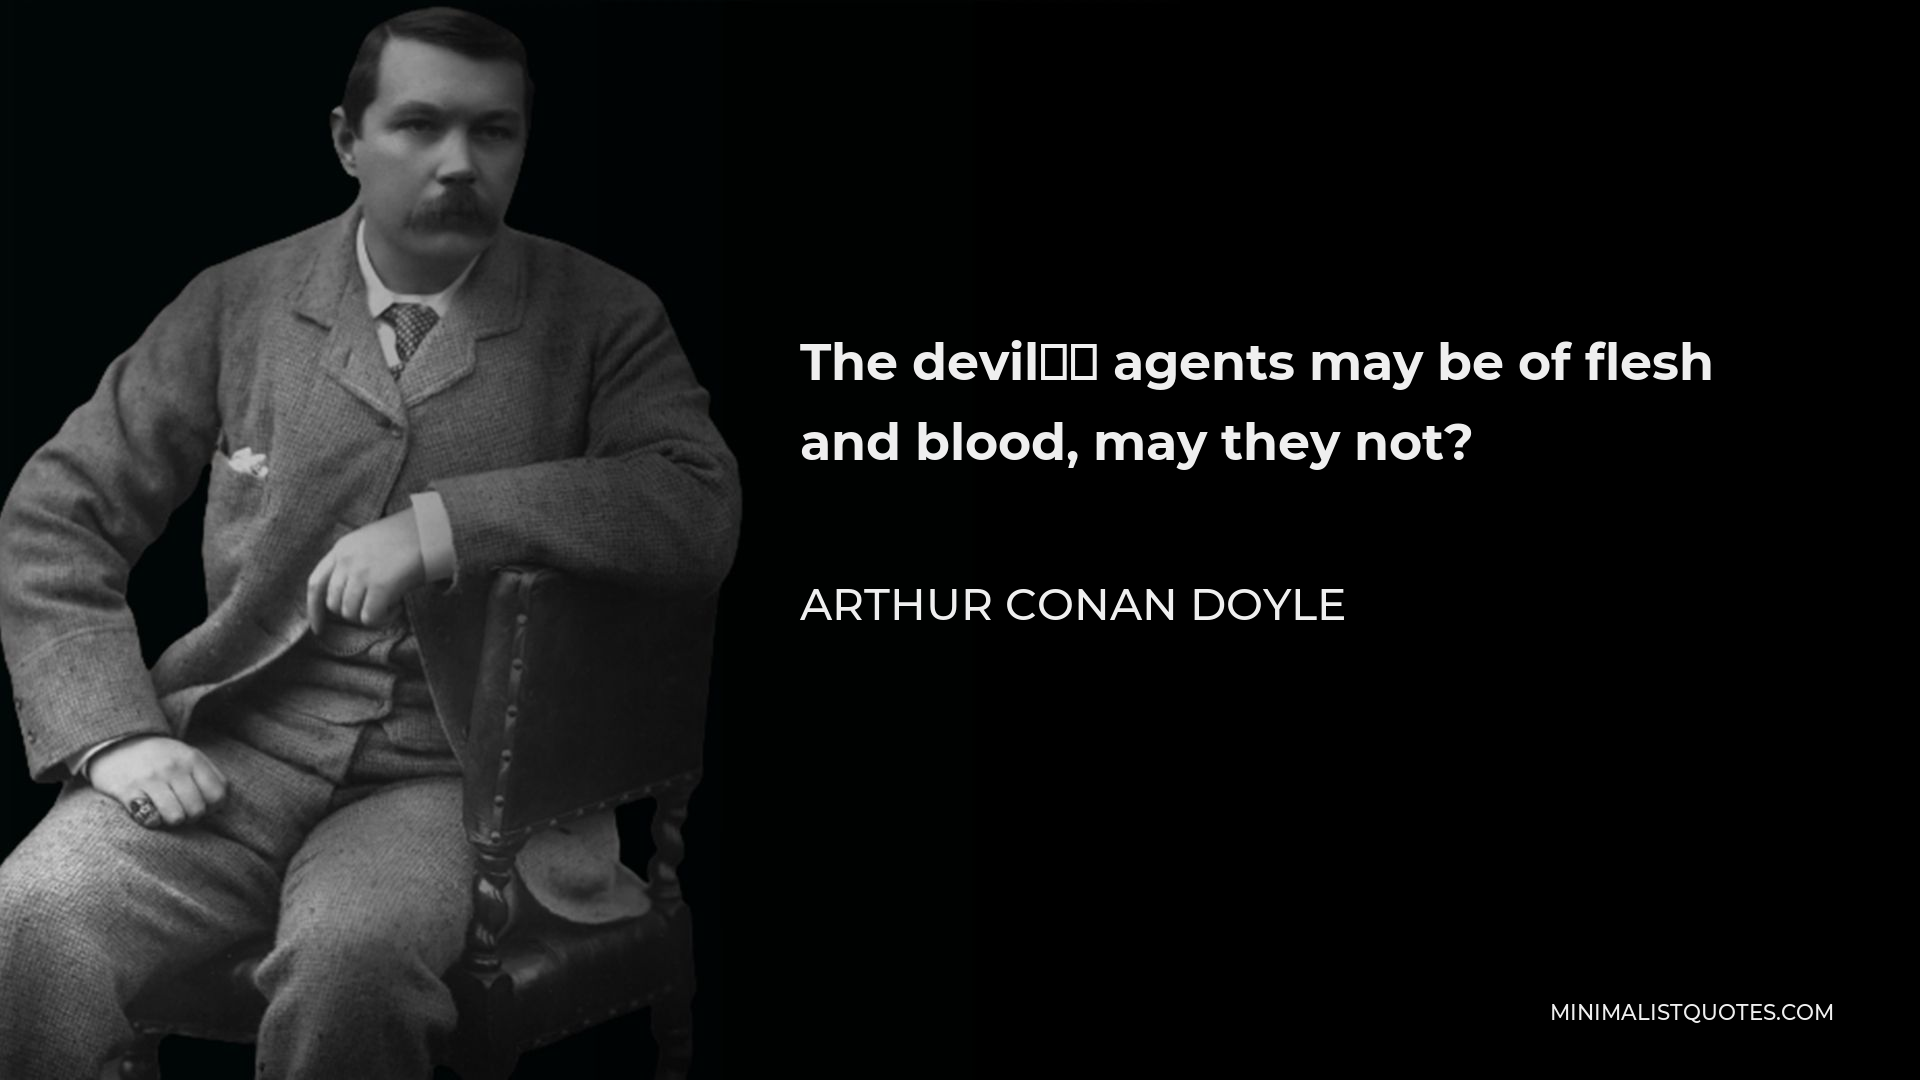 Arthur Conan Doyle Quote - The devil’s agents may be of flesh and blood, may they not?